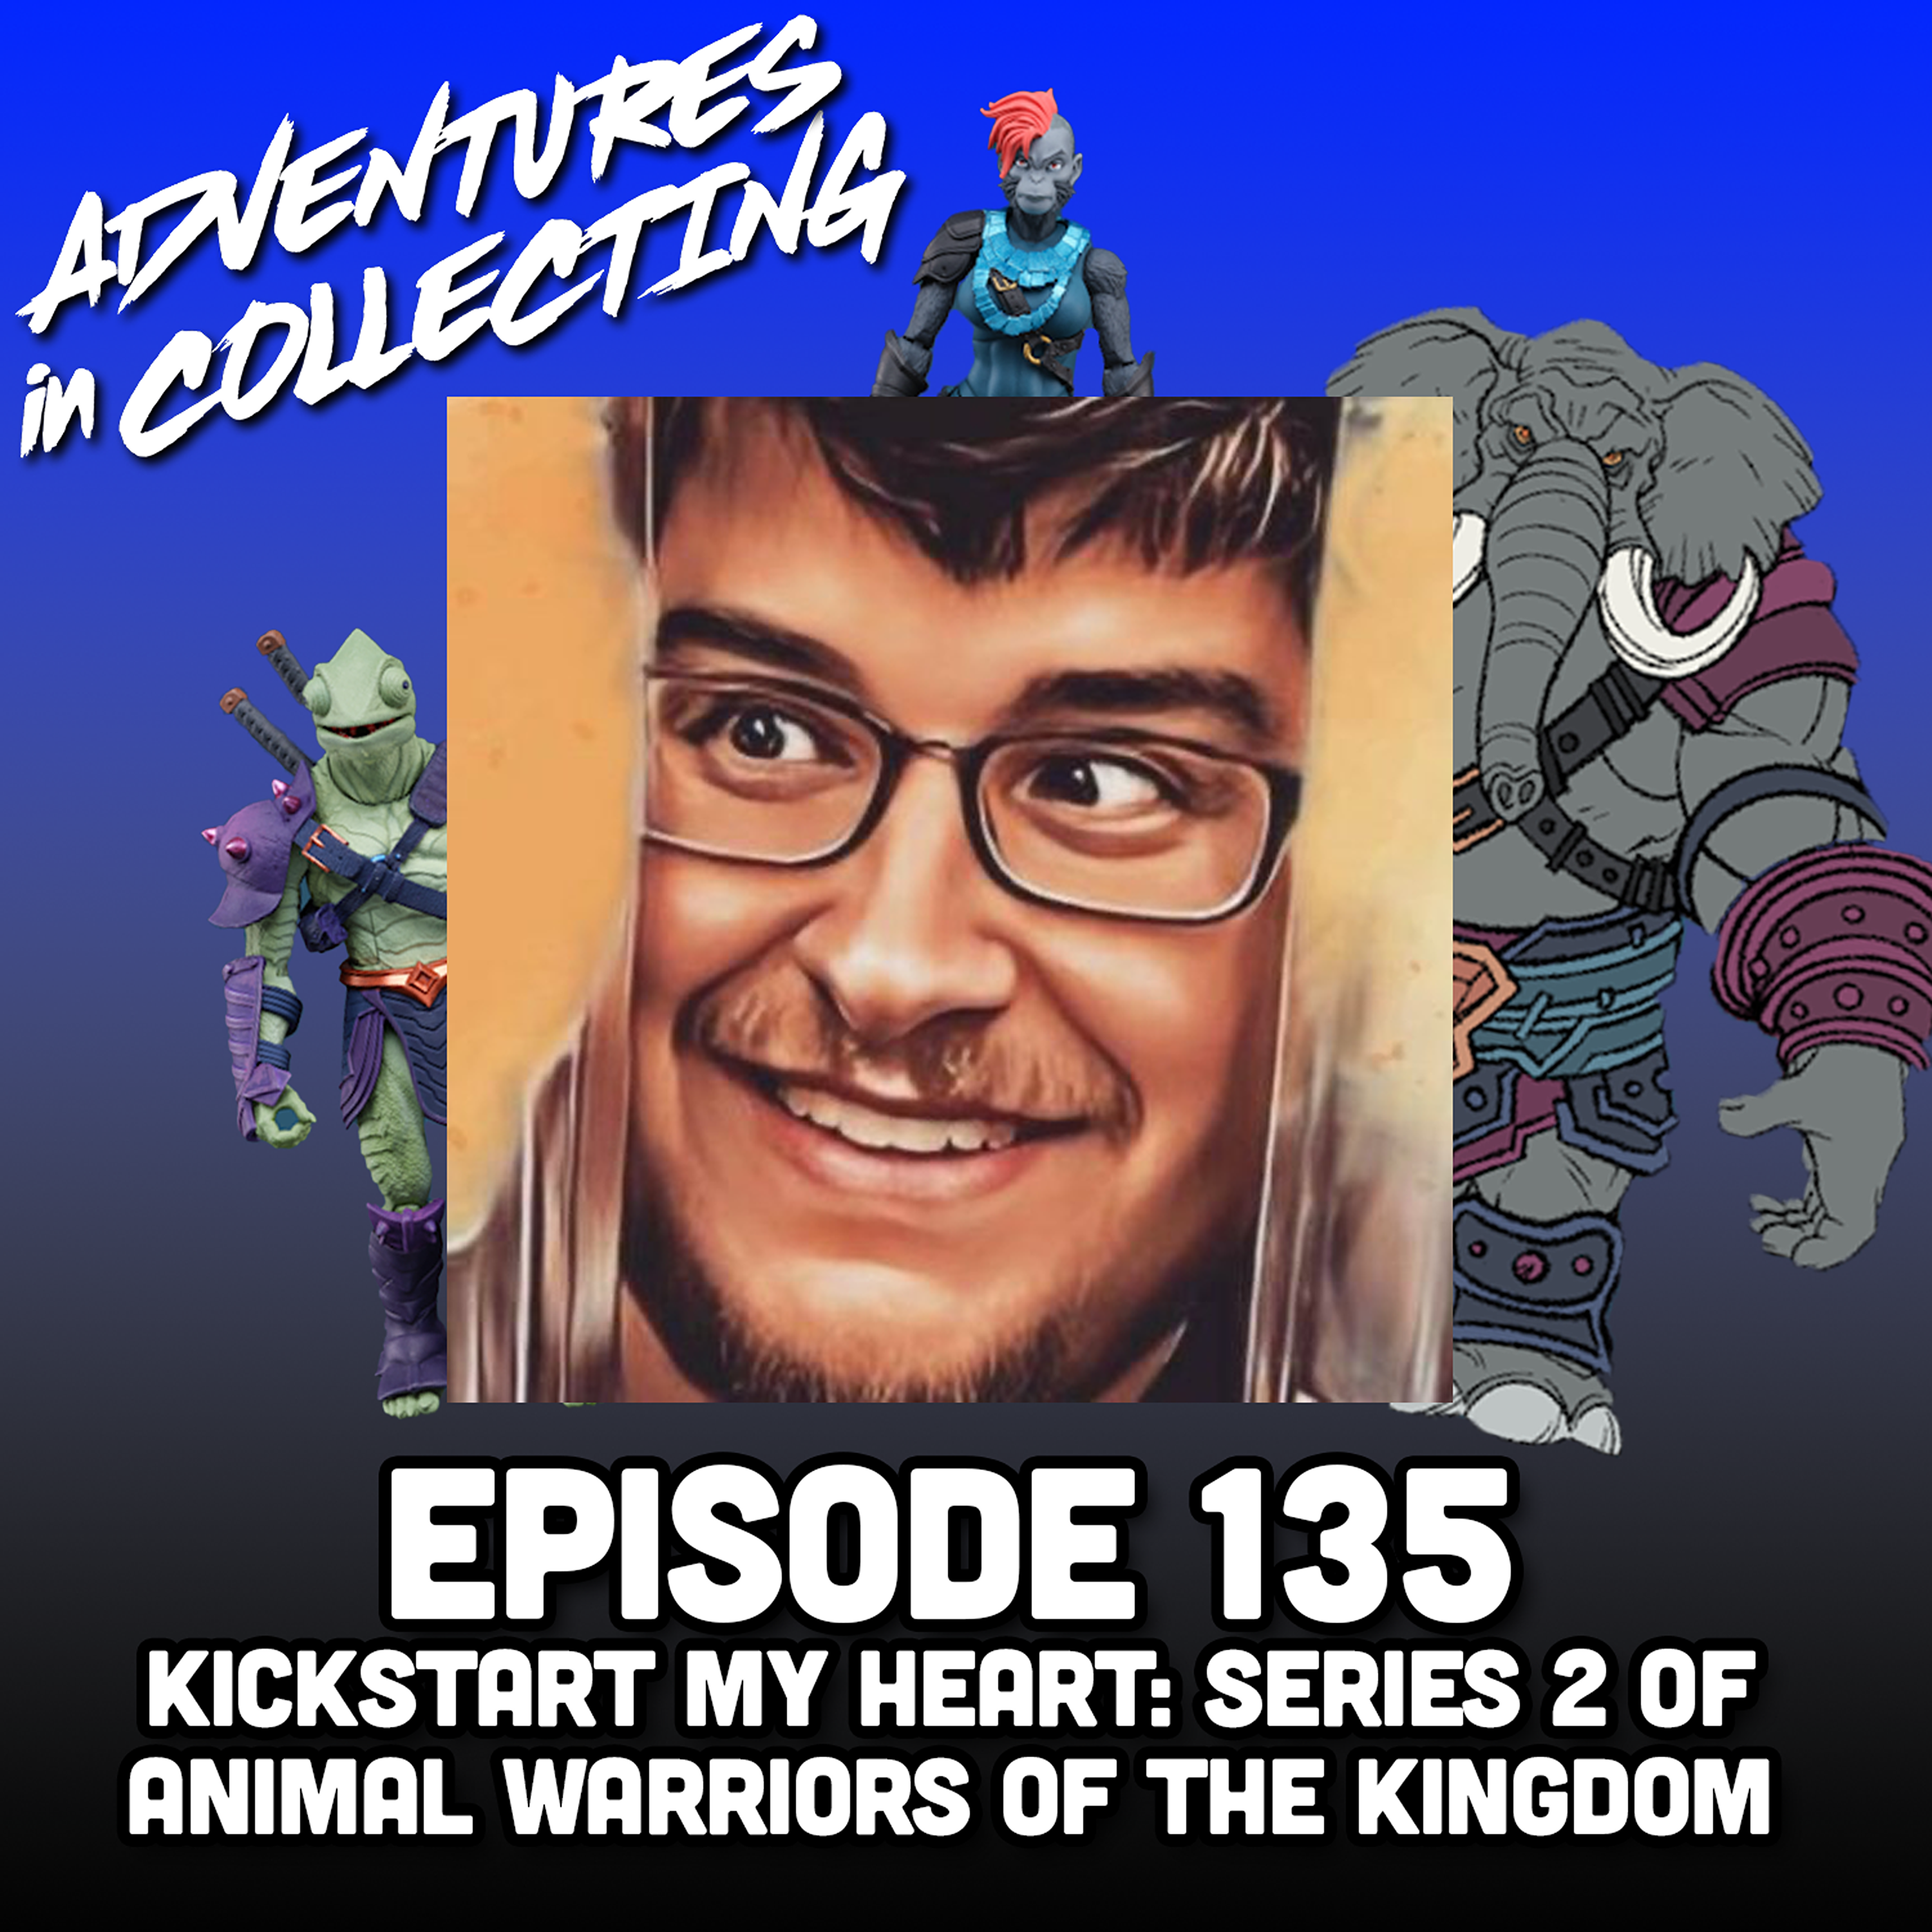 Kickstart My Heart: Series 2 of Animal Warriors of the Kingdom – Adventures in Collecting